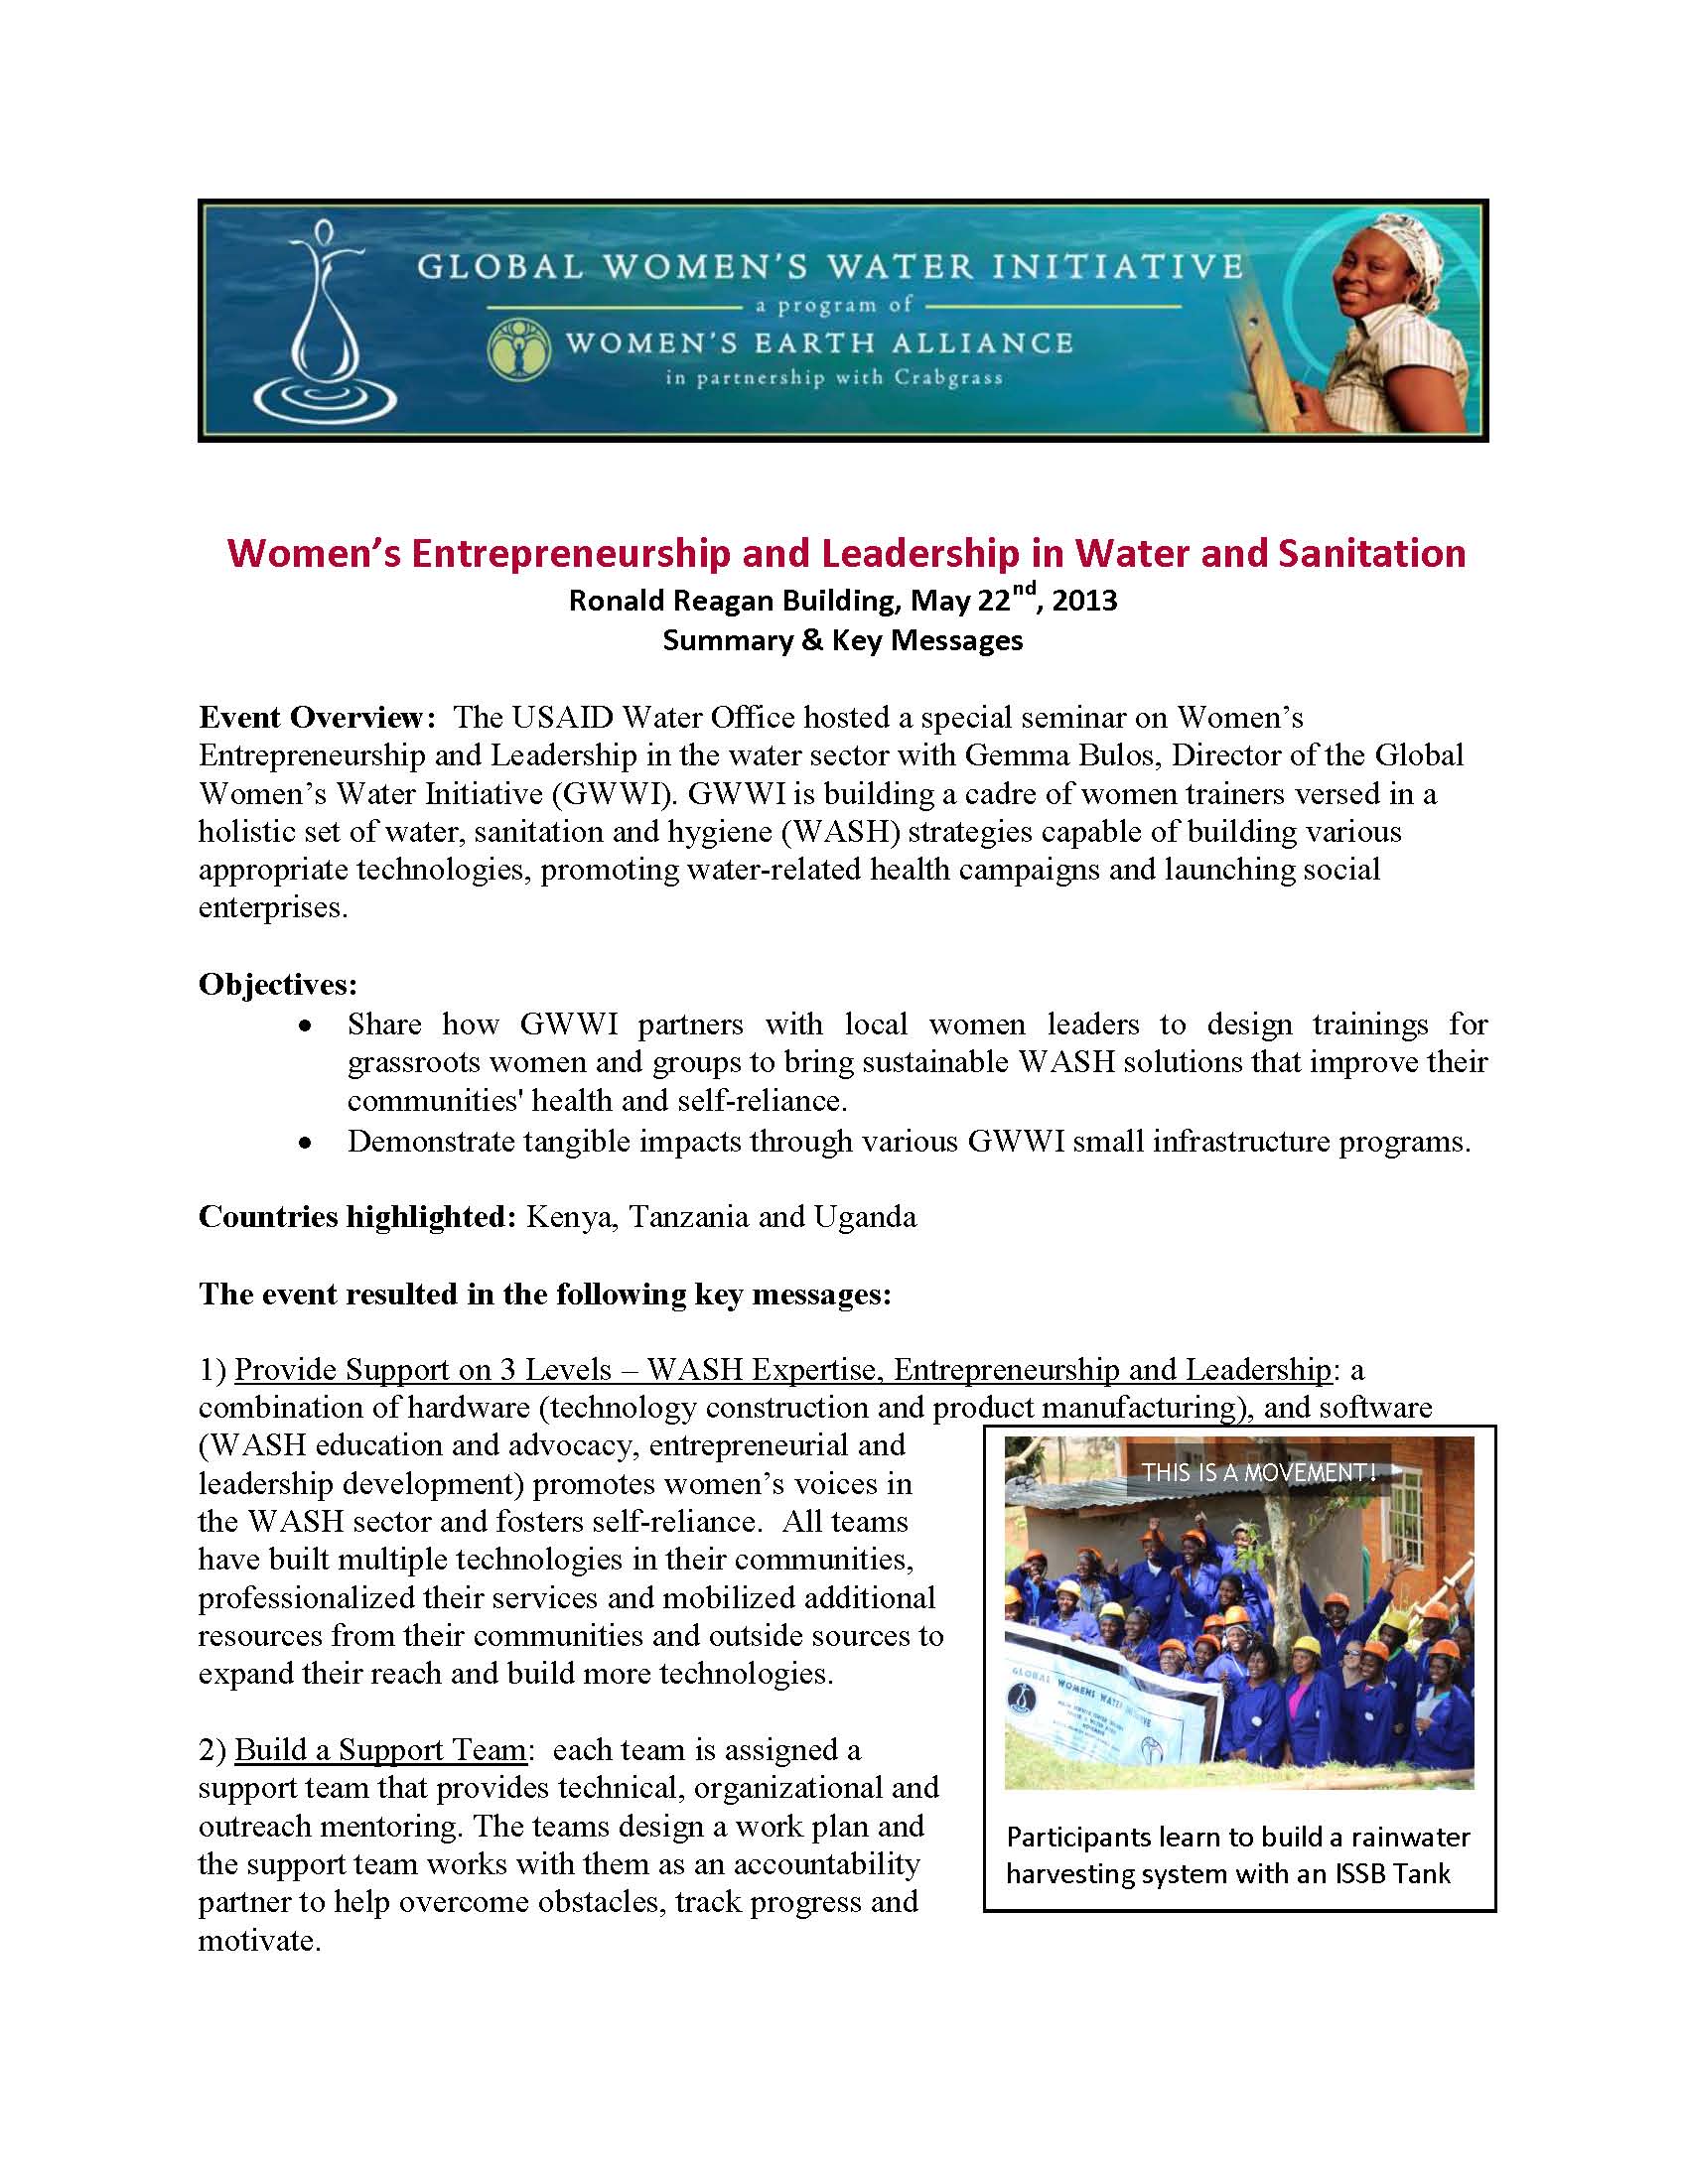 Key Takeaways from the Women’s Entrepreneurship and Leadership in Water and Sanitation learning event